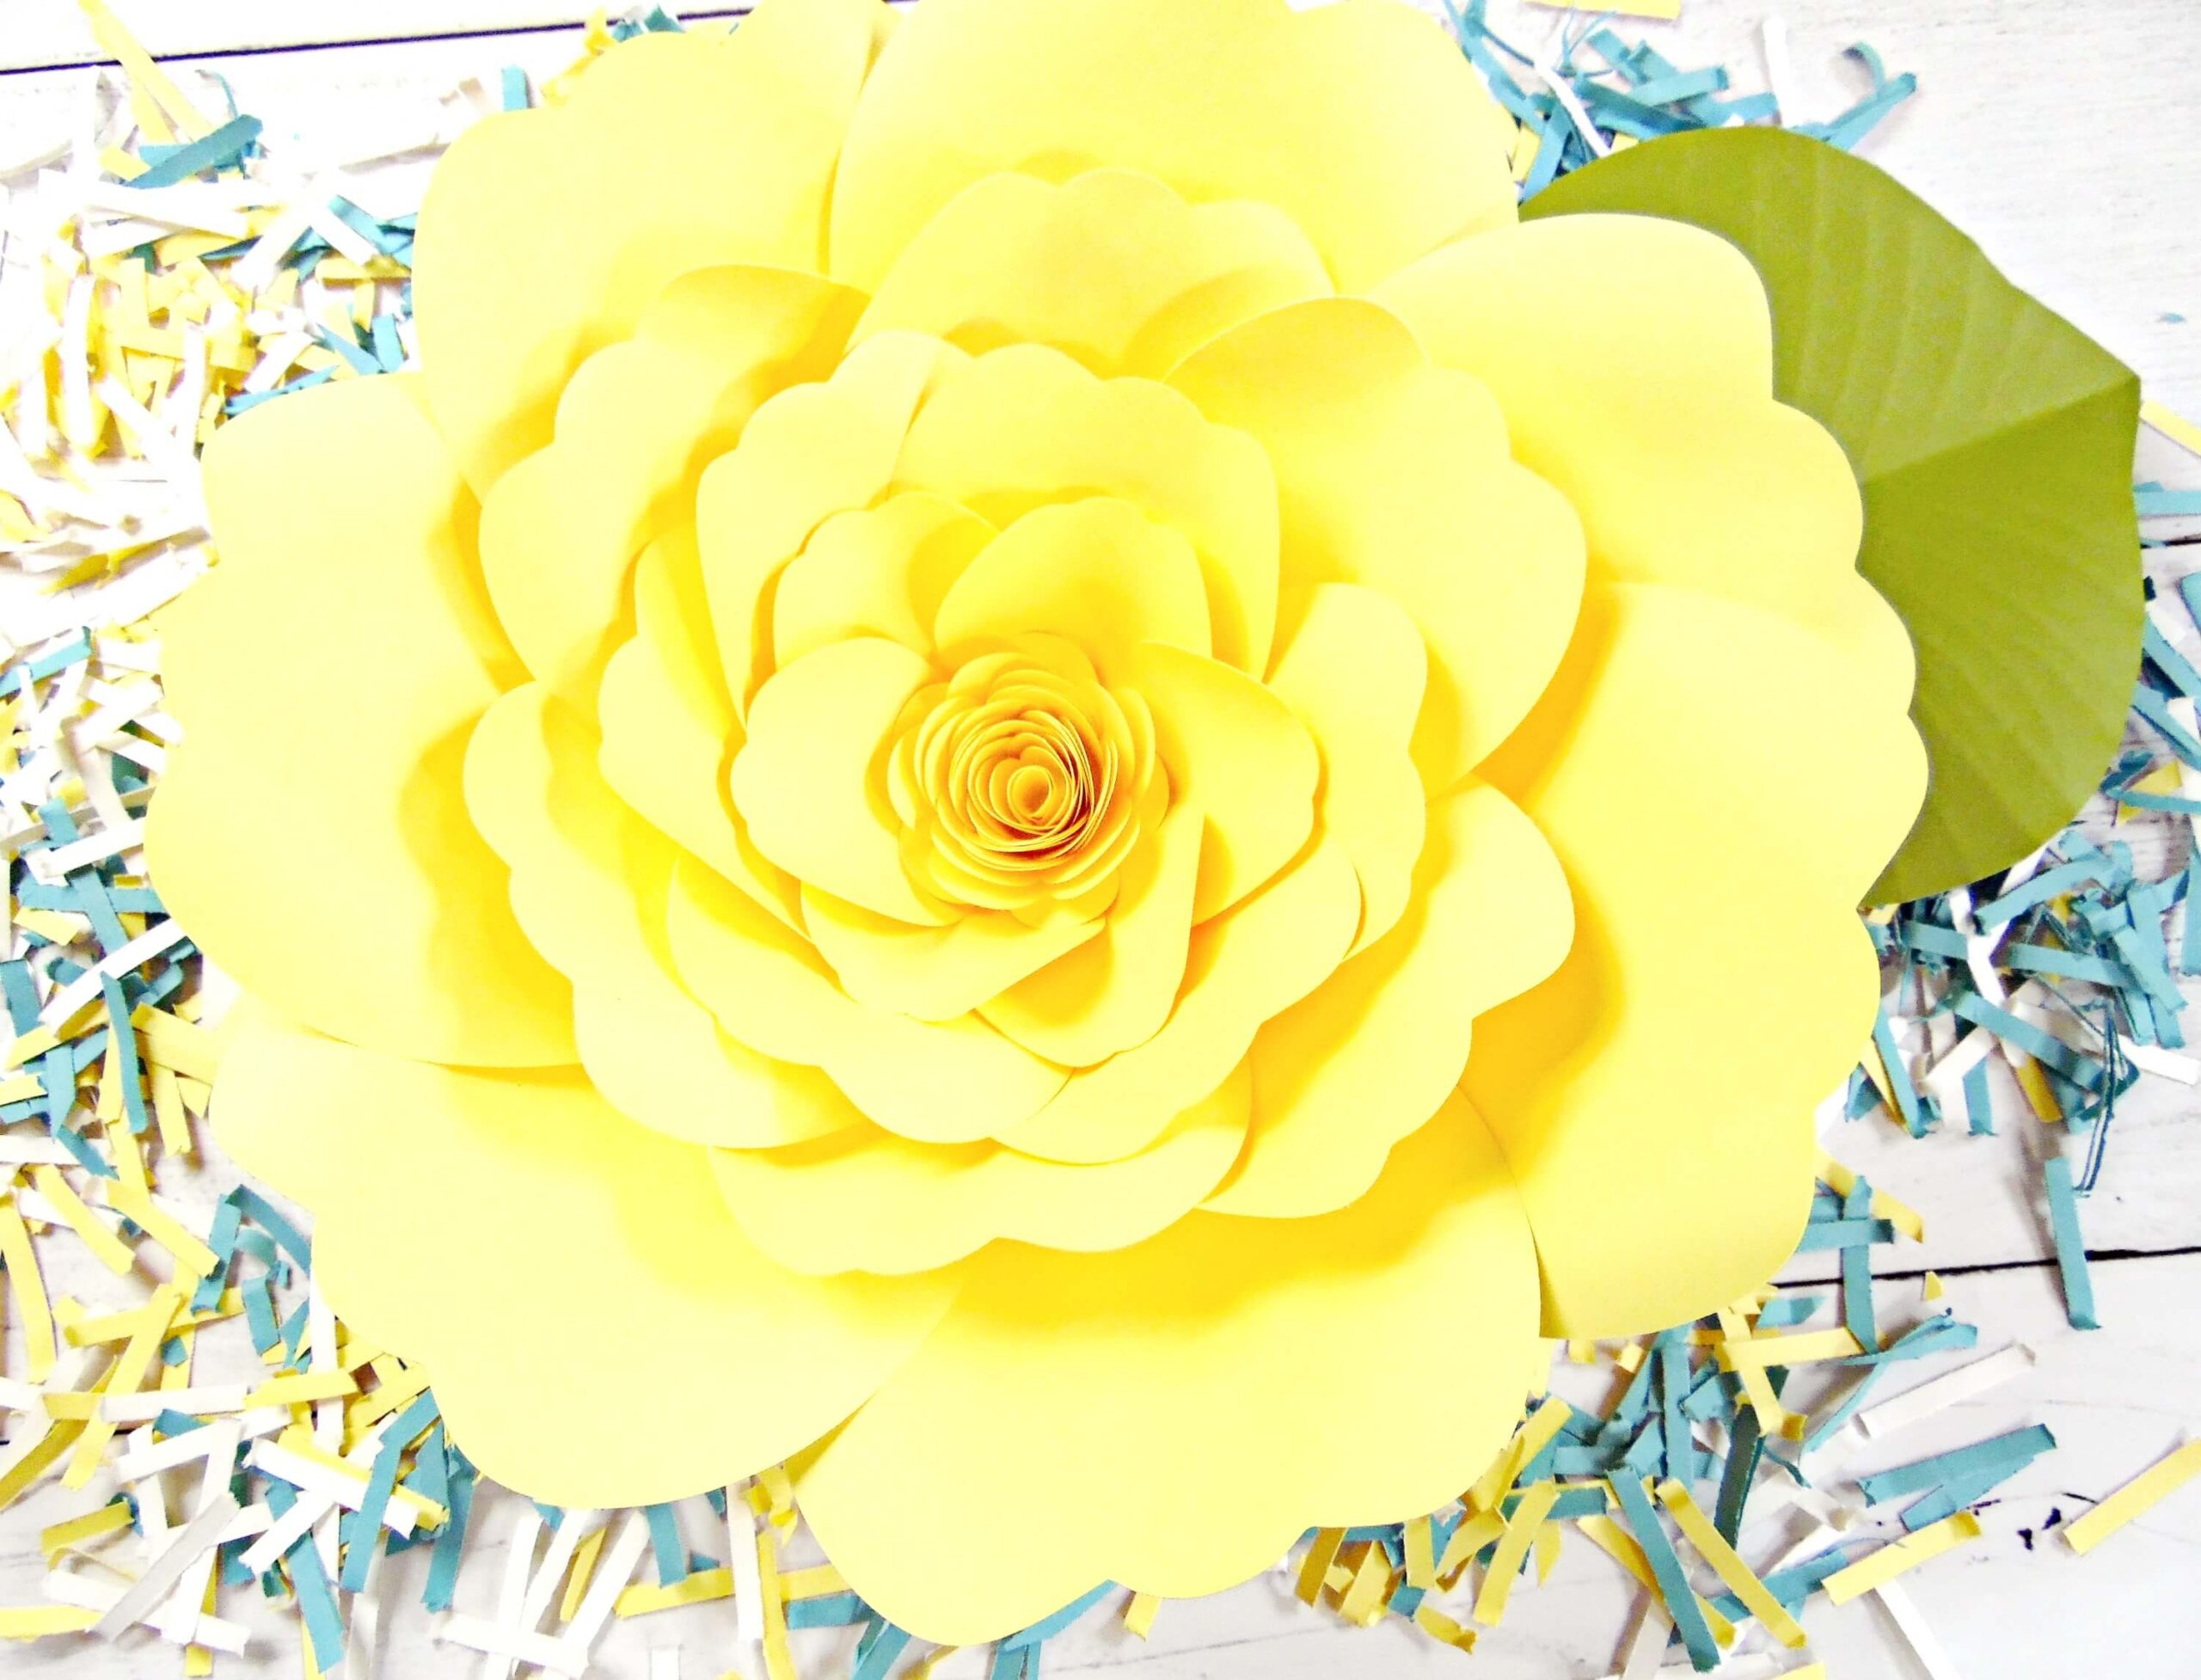 A giant yellow Charlotte paper rose sits on a white background that's covered with confetti strips of yellow, white, and blue paper.